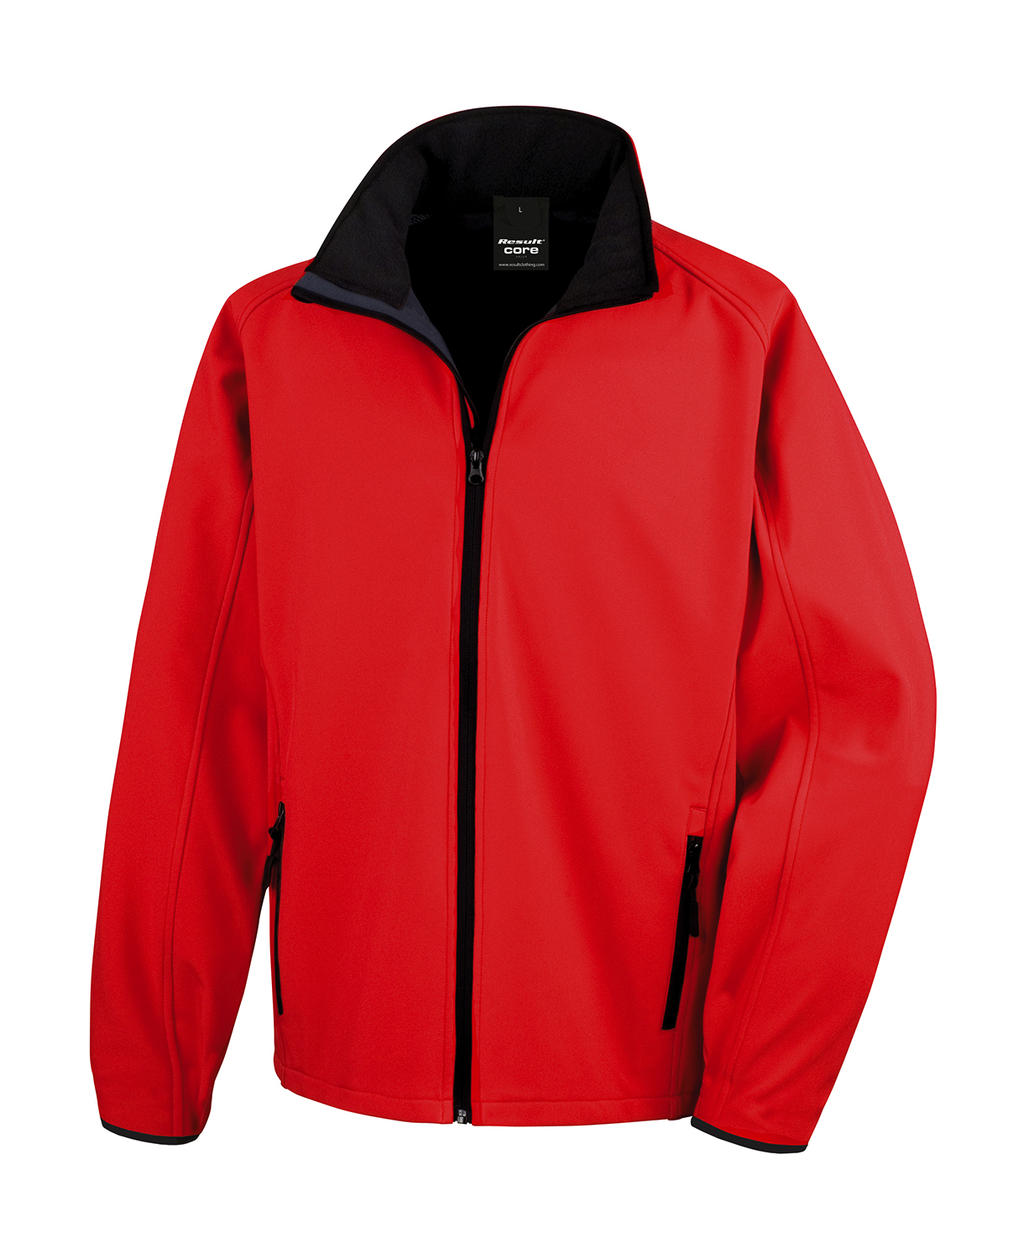  Printable Softshell Jacket in Farbe Red/Black